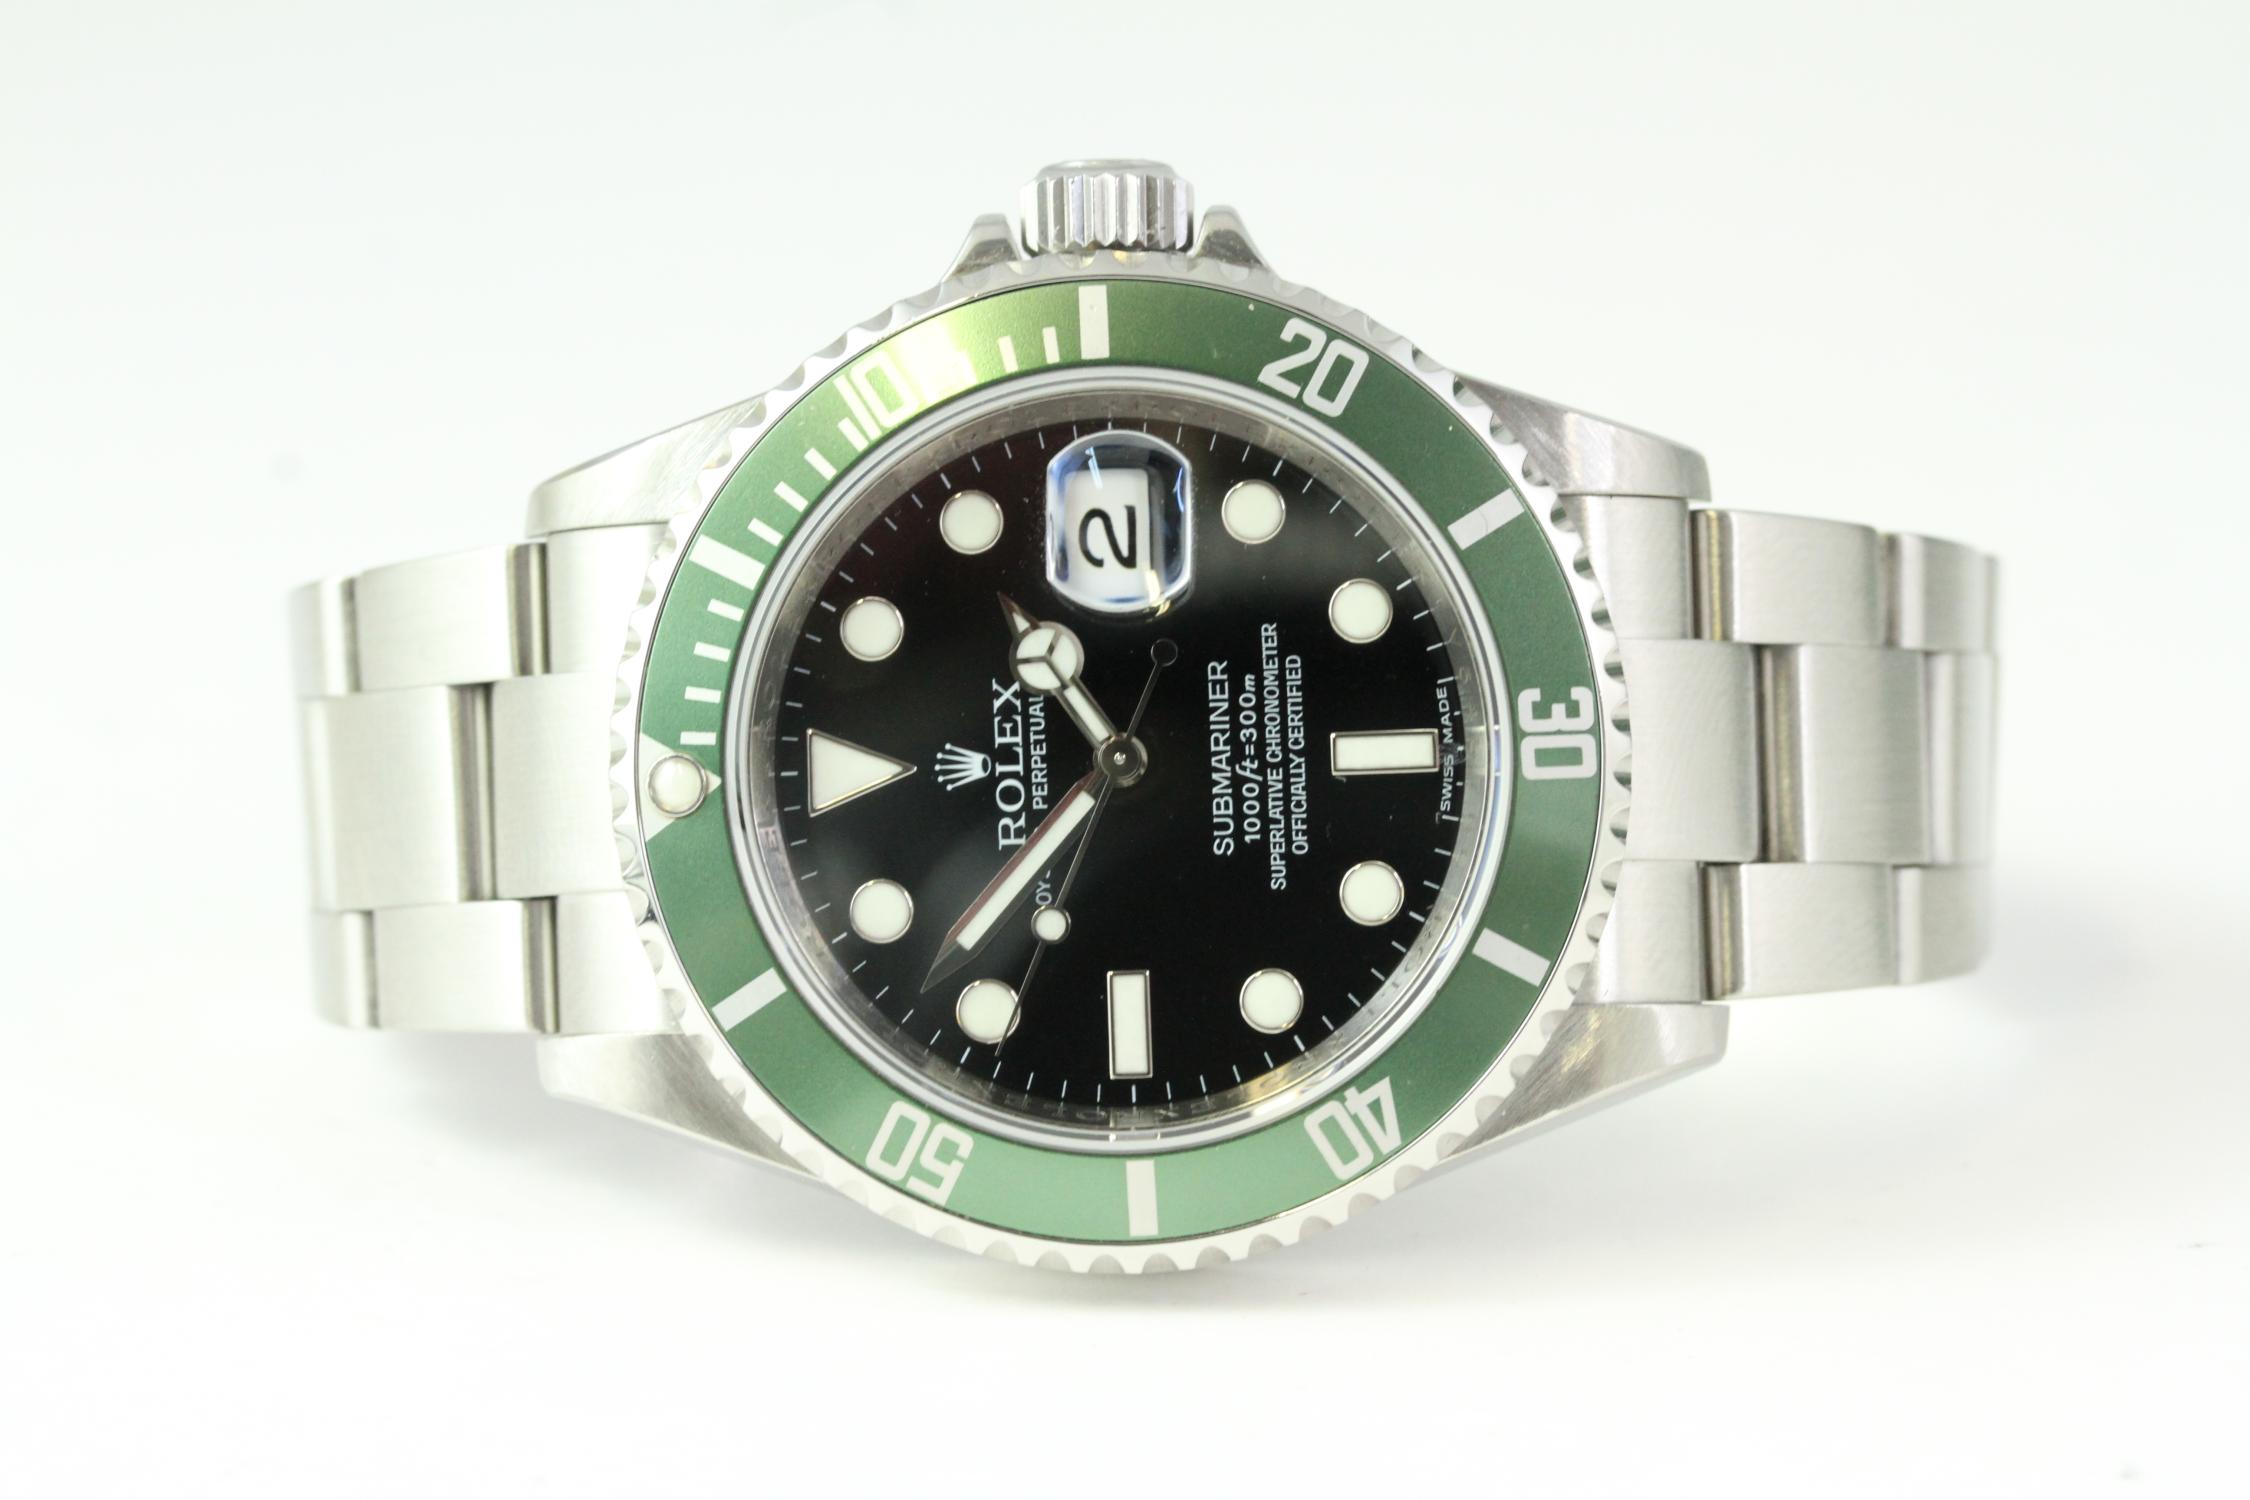 ROLEX SUBMARINER 'KERMIT' 16610LV BOX AND PAPERS 2009 - Image 4 of 10